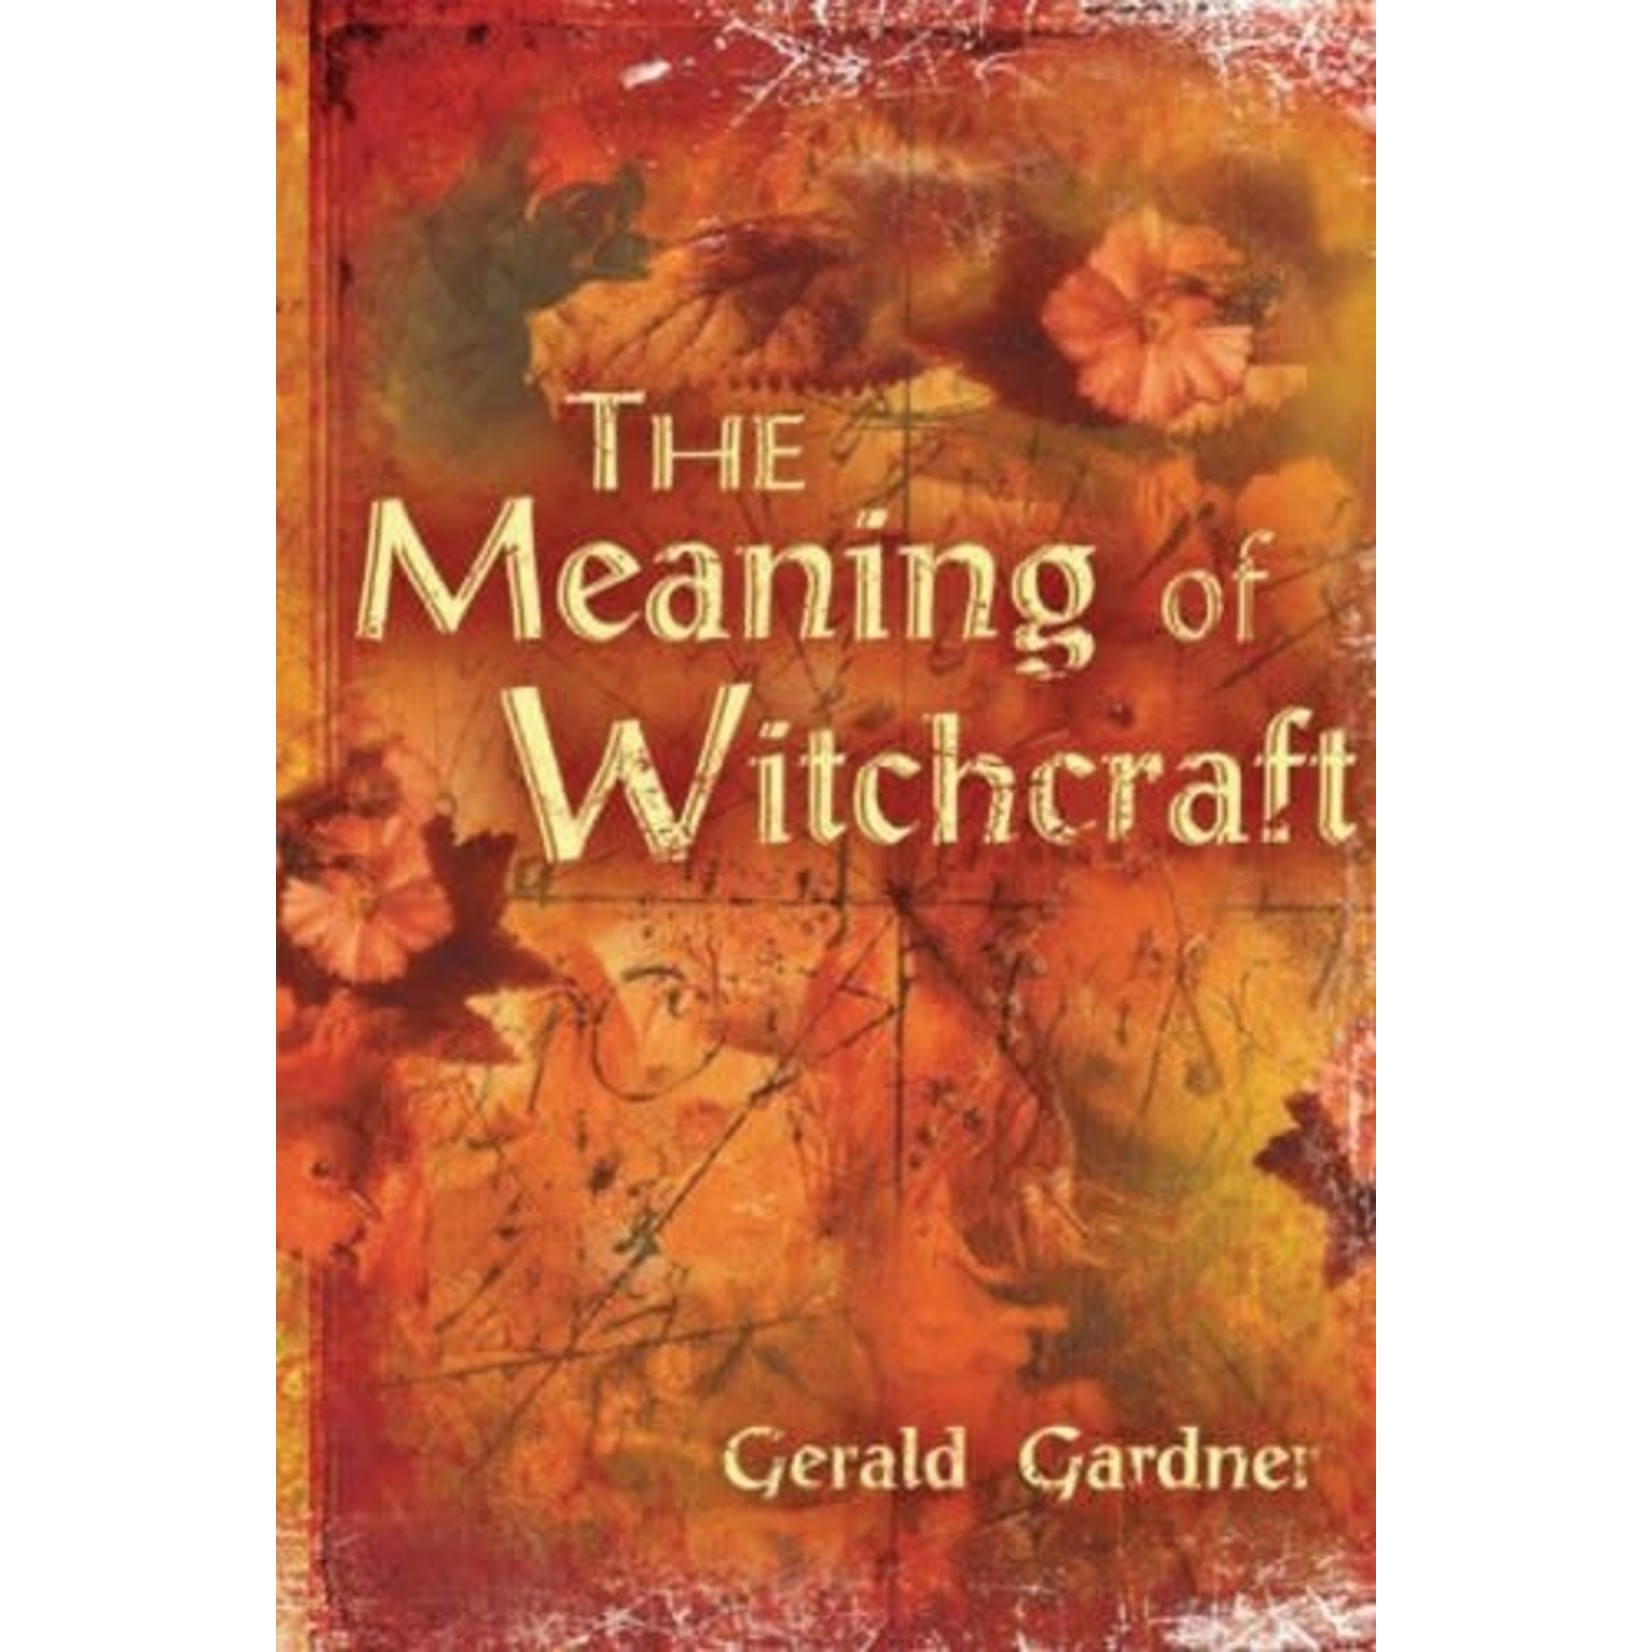 The Meaning of Witchcraft by Gerald Gardner